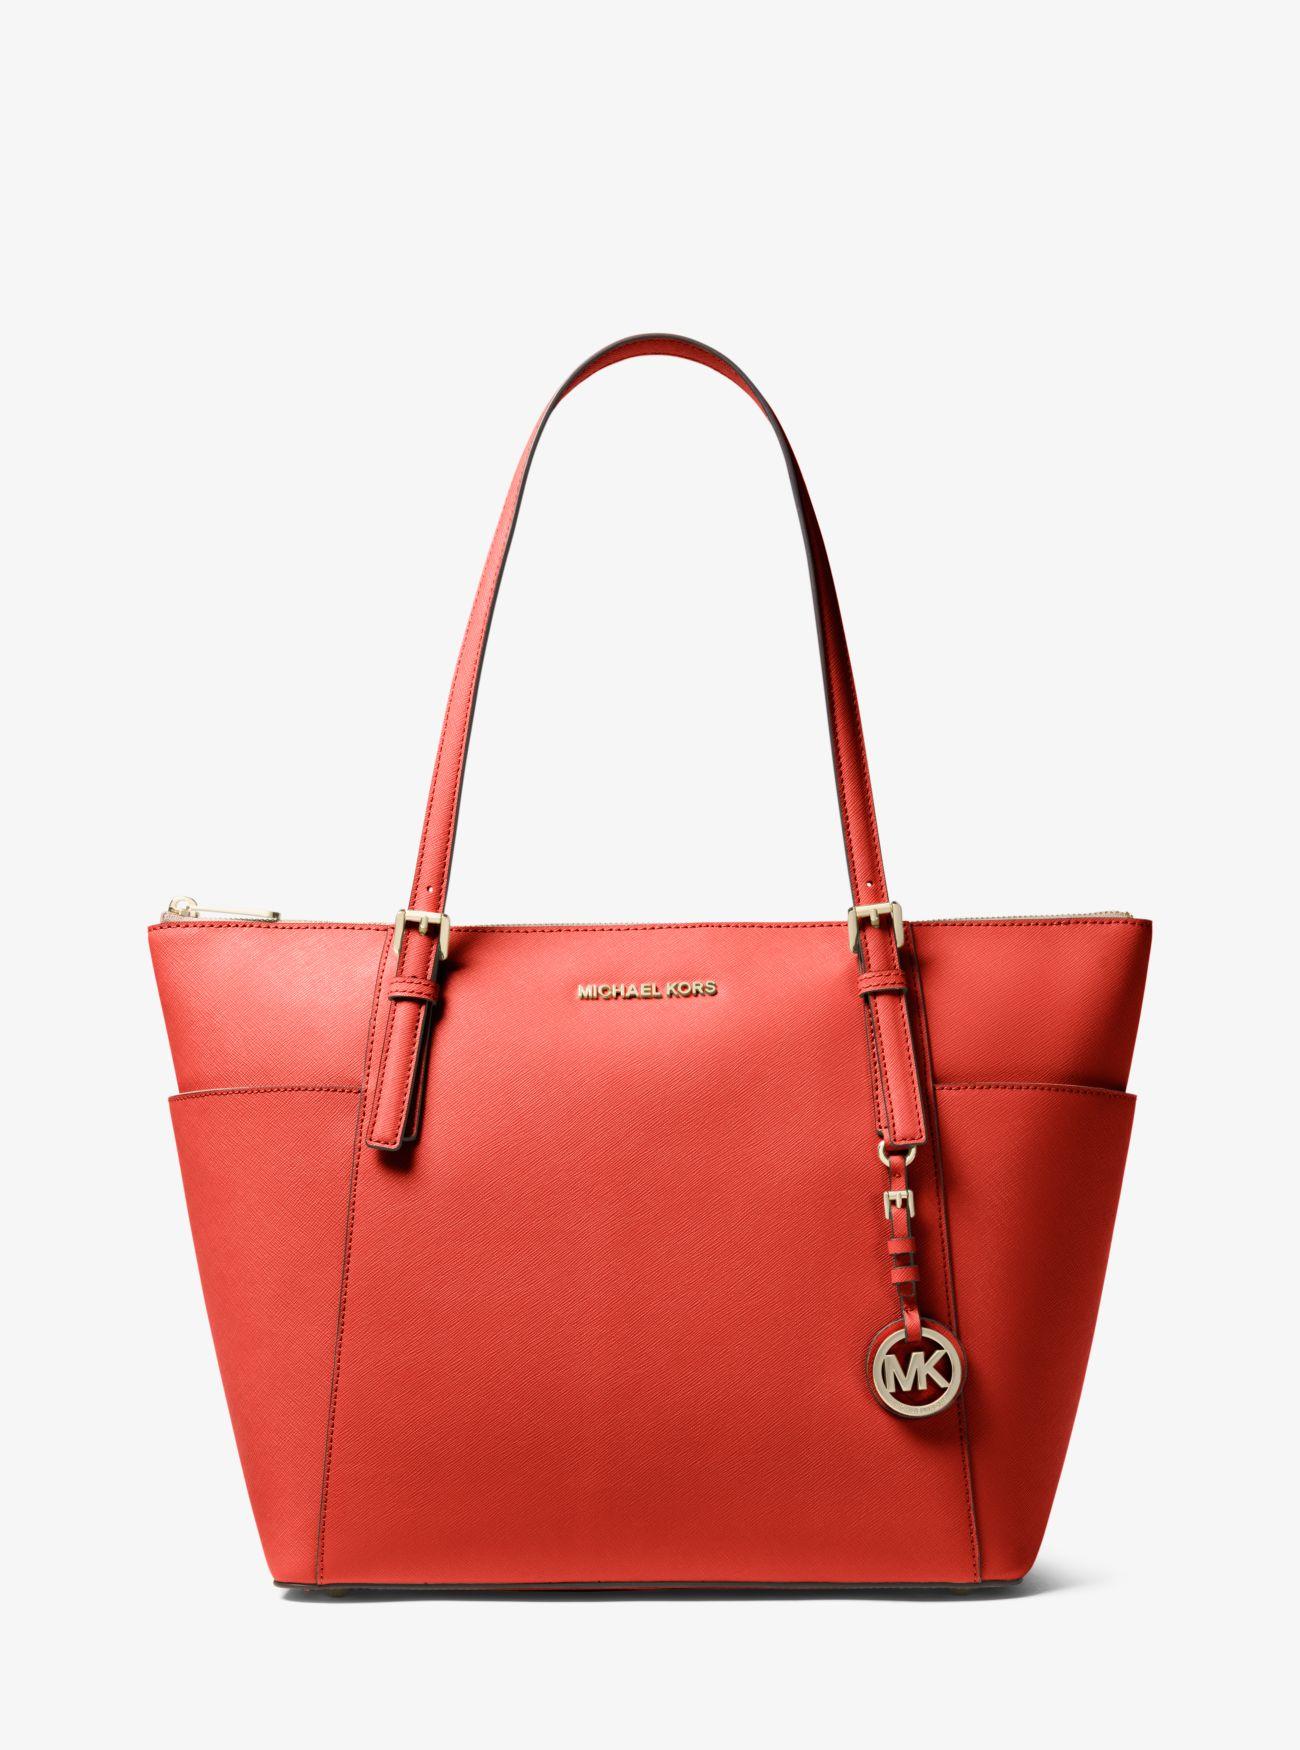 Michael Kors Jet Set Large Saffiano Leather Top-zip Tote Bag in Coral ...